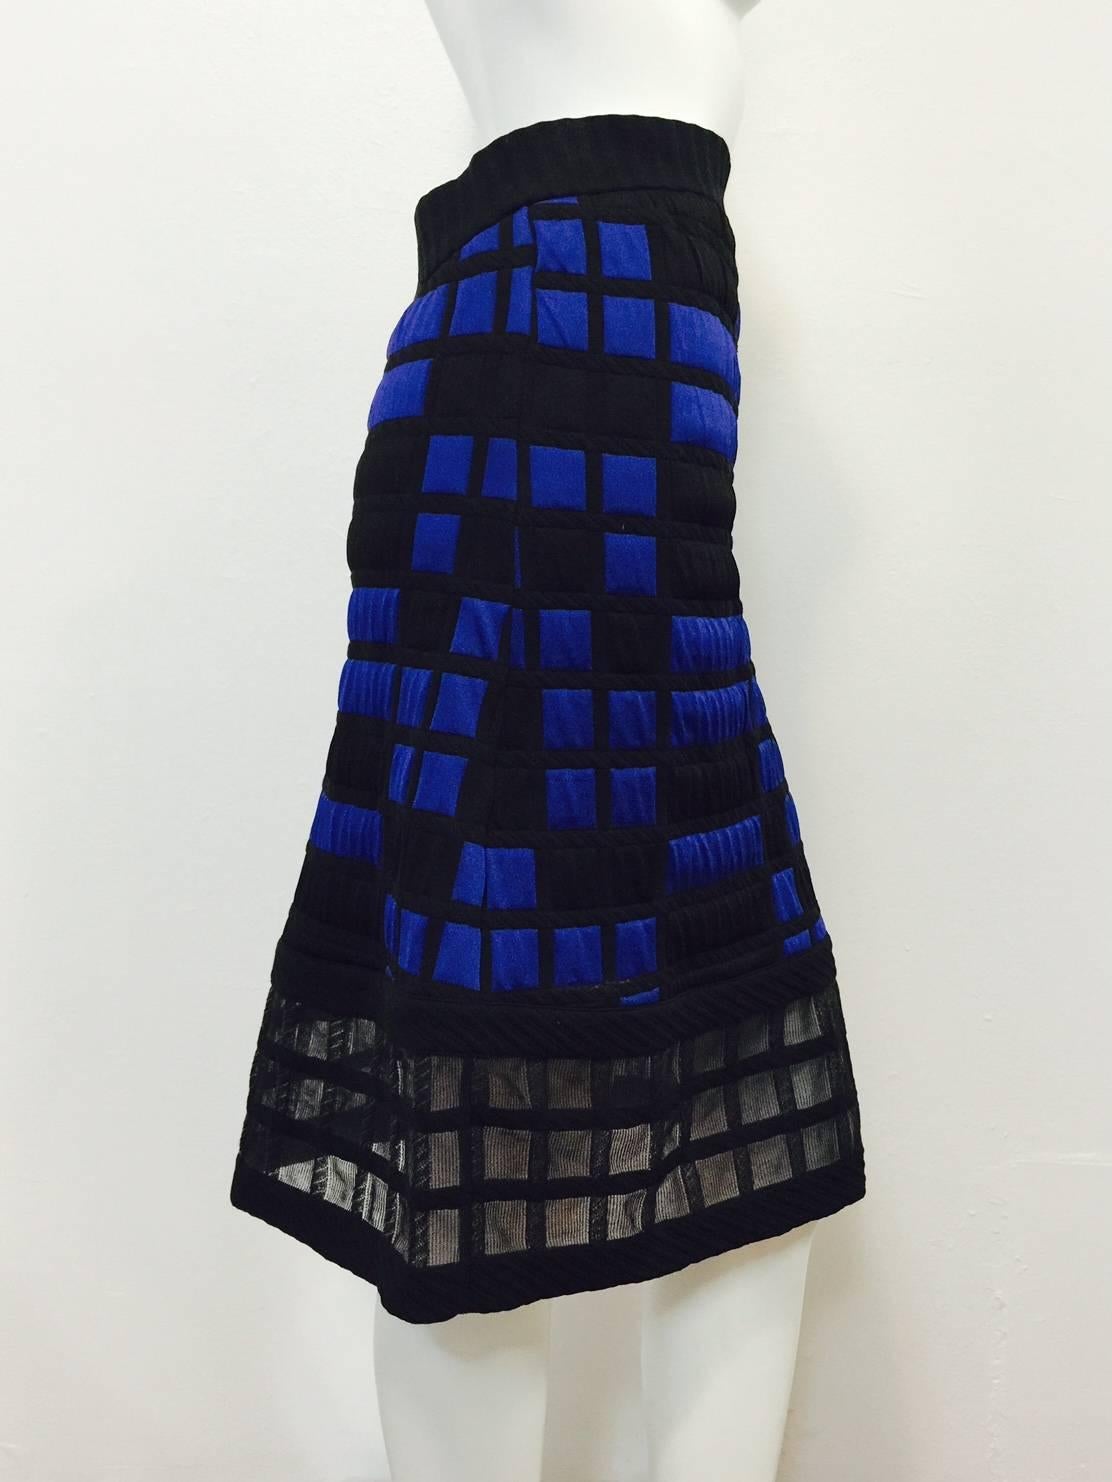 Chanel Black, Royal Blue Colorblocked Quilted A-Line Skirt With Sheer Hem 42 EU In Excellent Condition For Sale In Palm Beach, FL